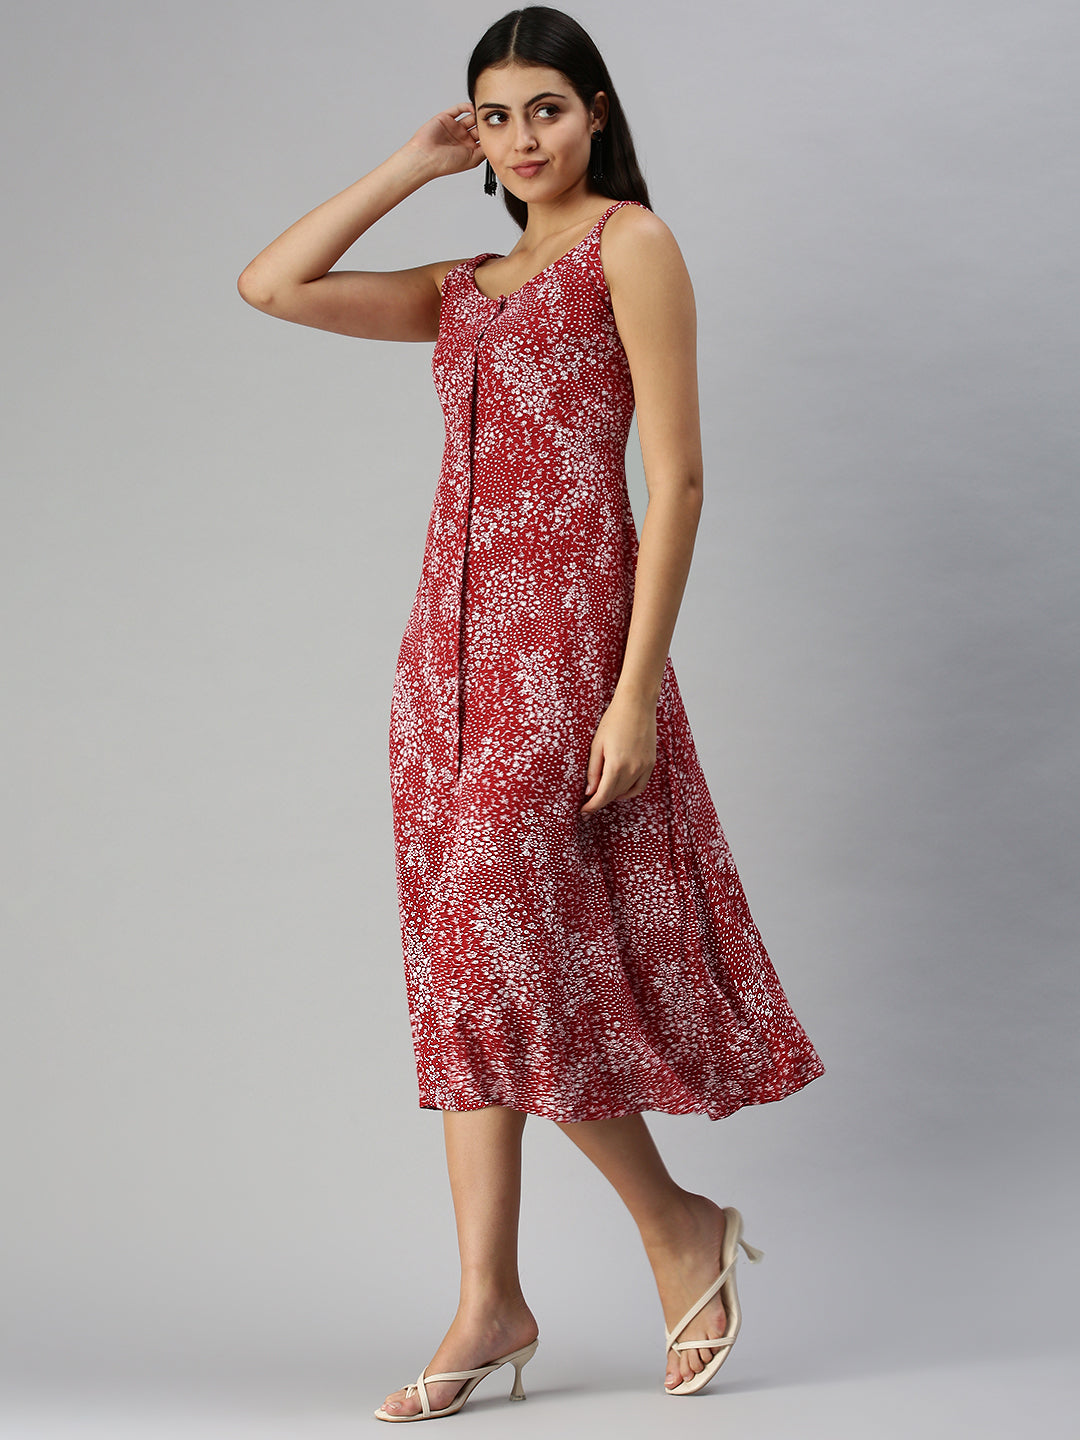 Women's Red Floral A-Line Dress